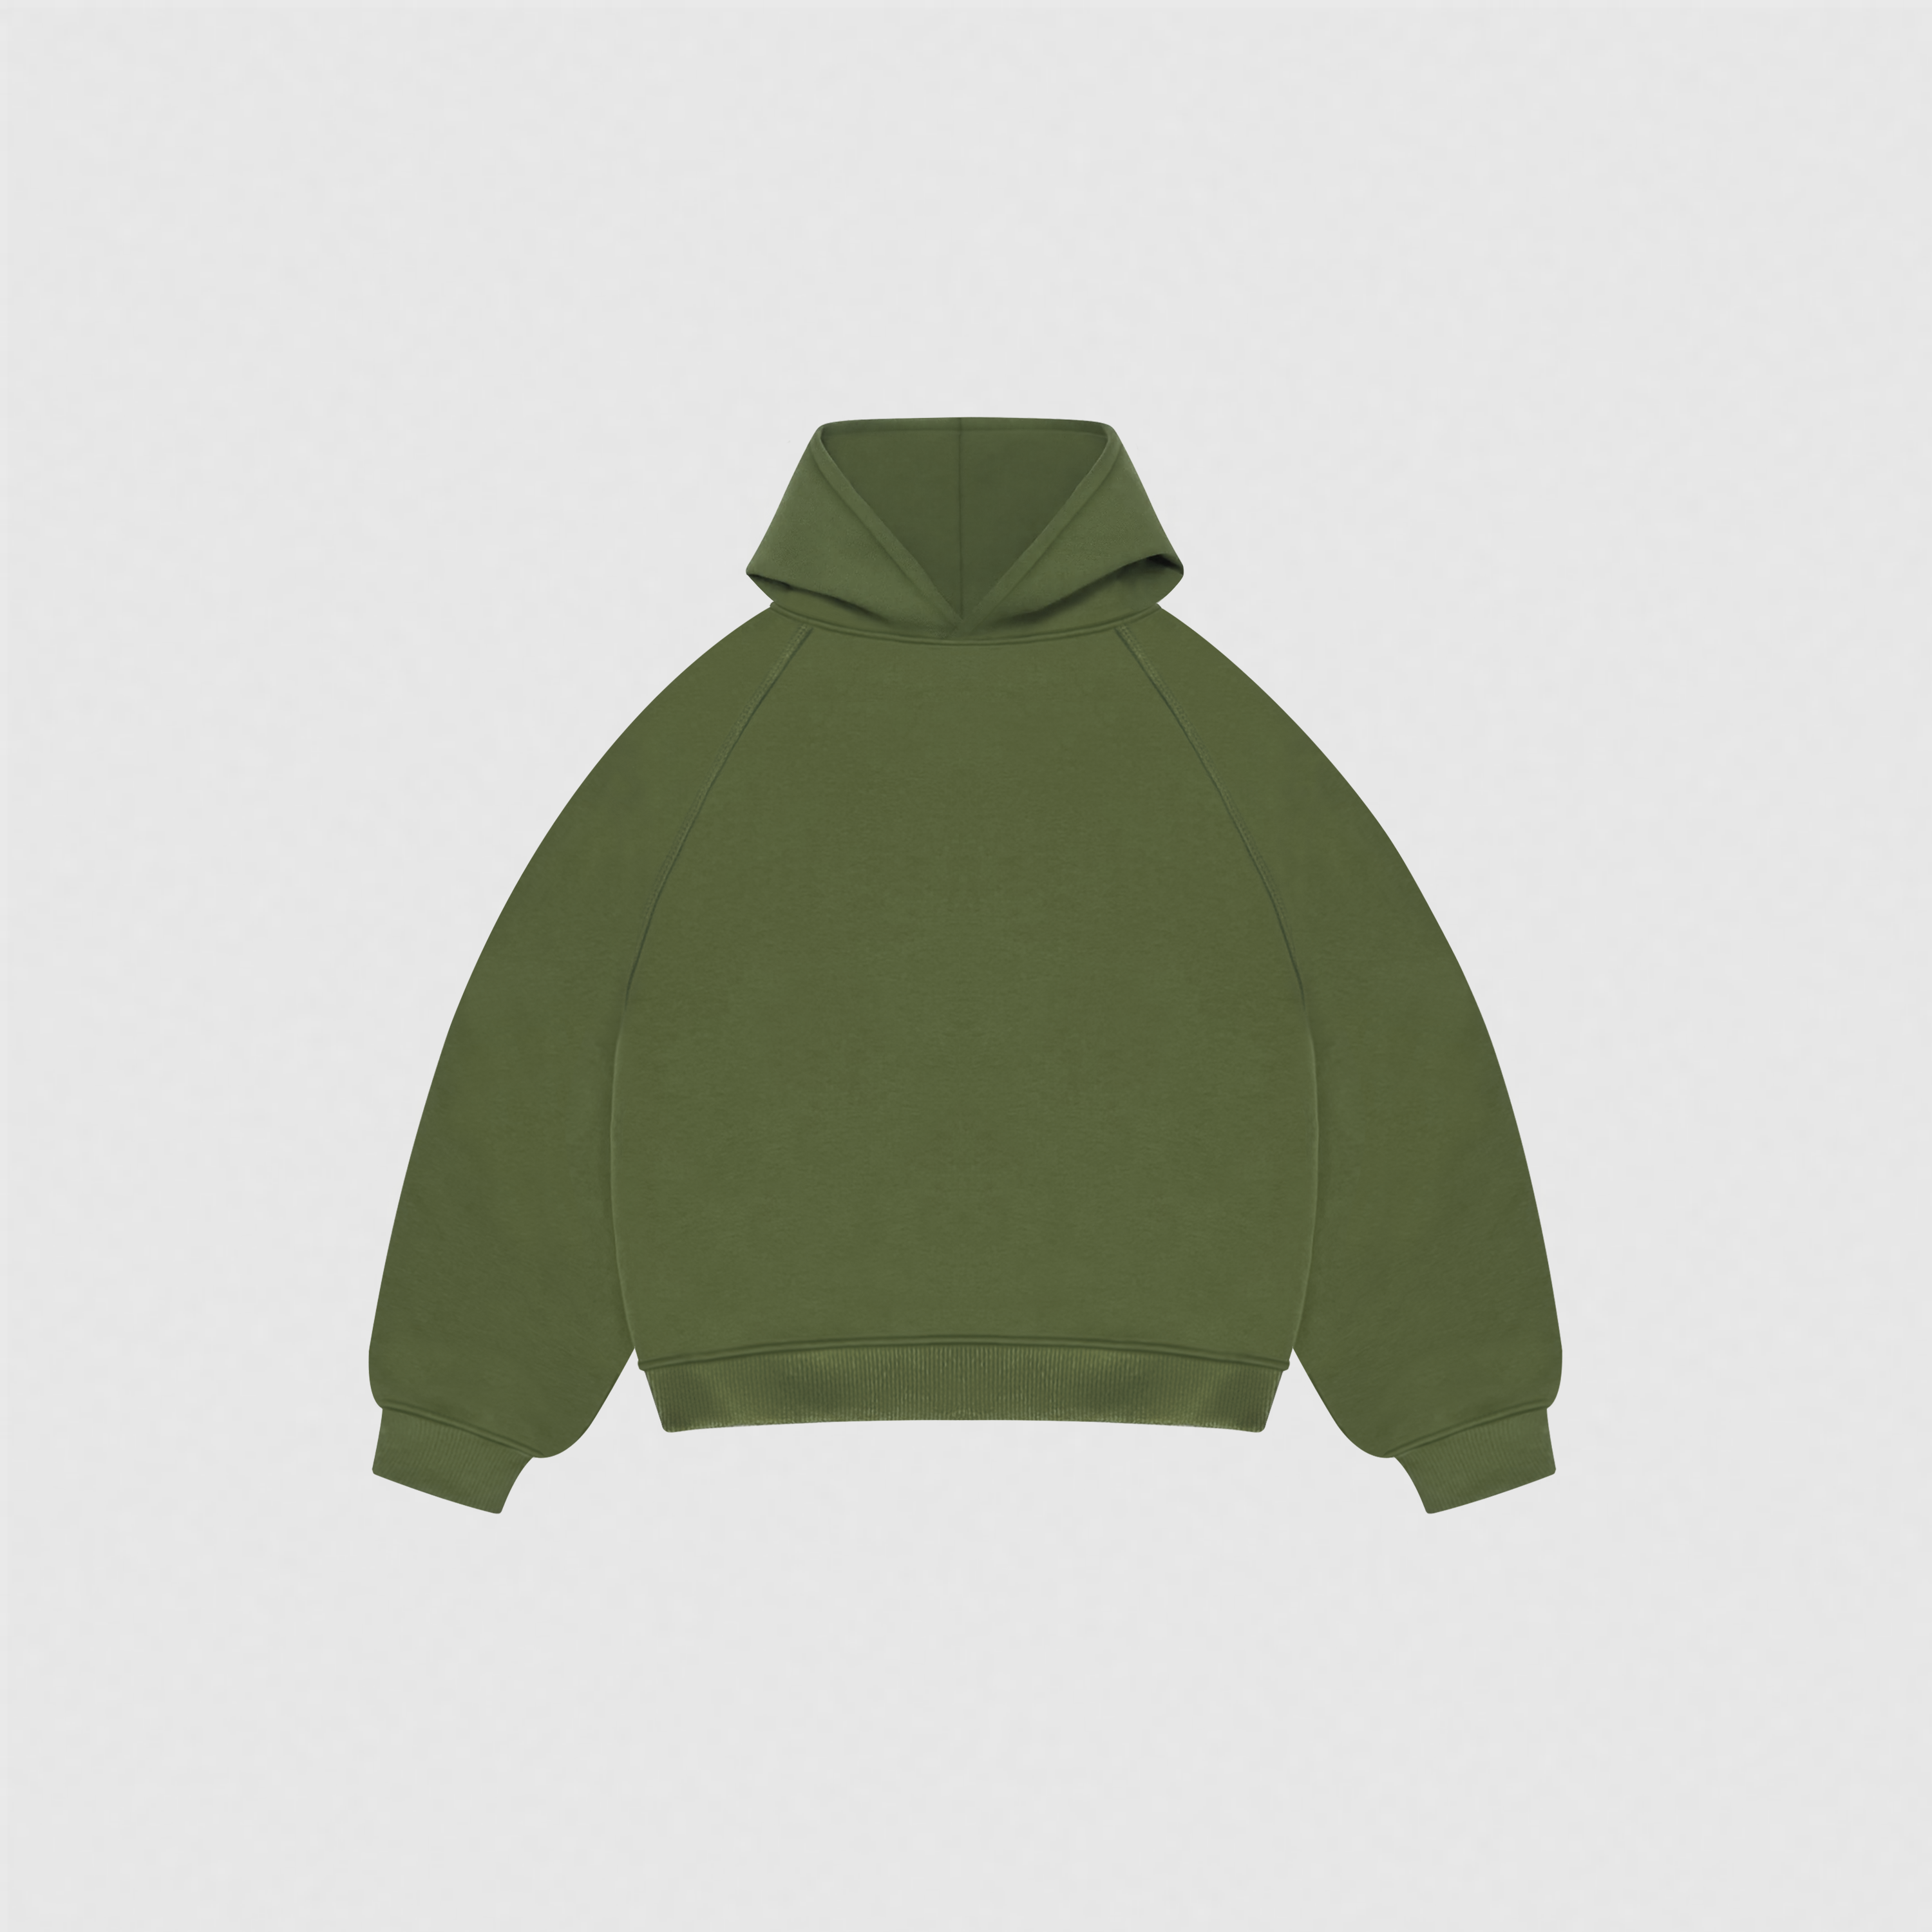 EVERYDAY OLIVE GREEN HOODIE-Hoodie-Lomalab-2X-SMALL-Green-Lomalab